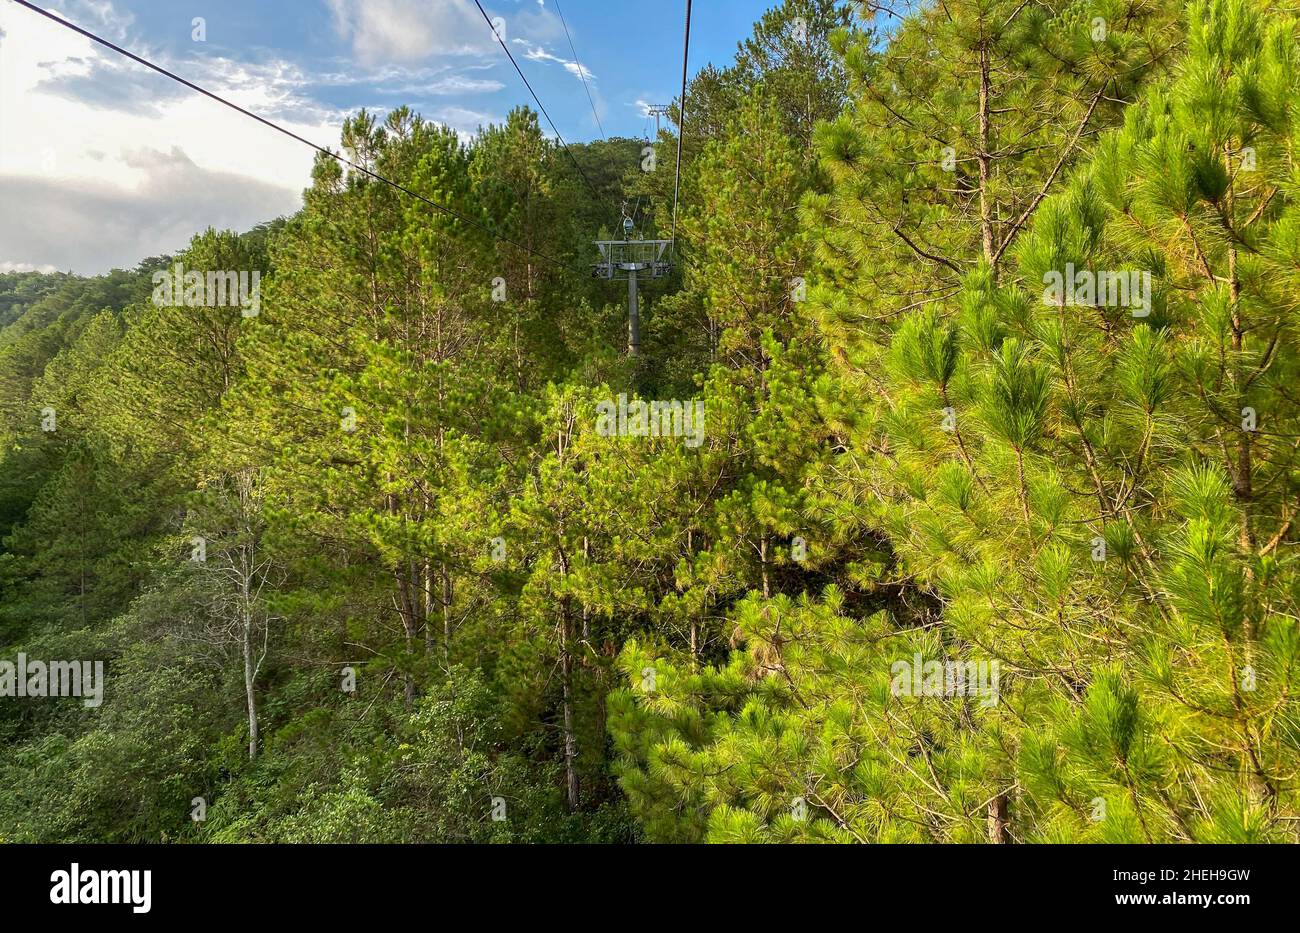 Aerial view of pine tree forest in Dalat Highland, Vietnam. Stock Photo